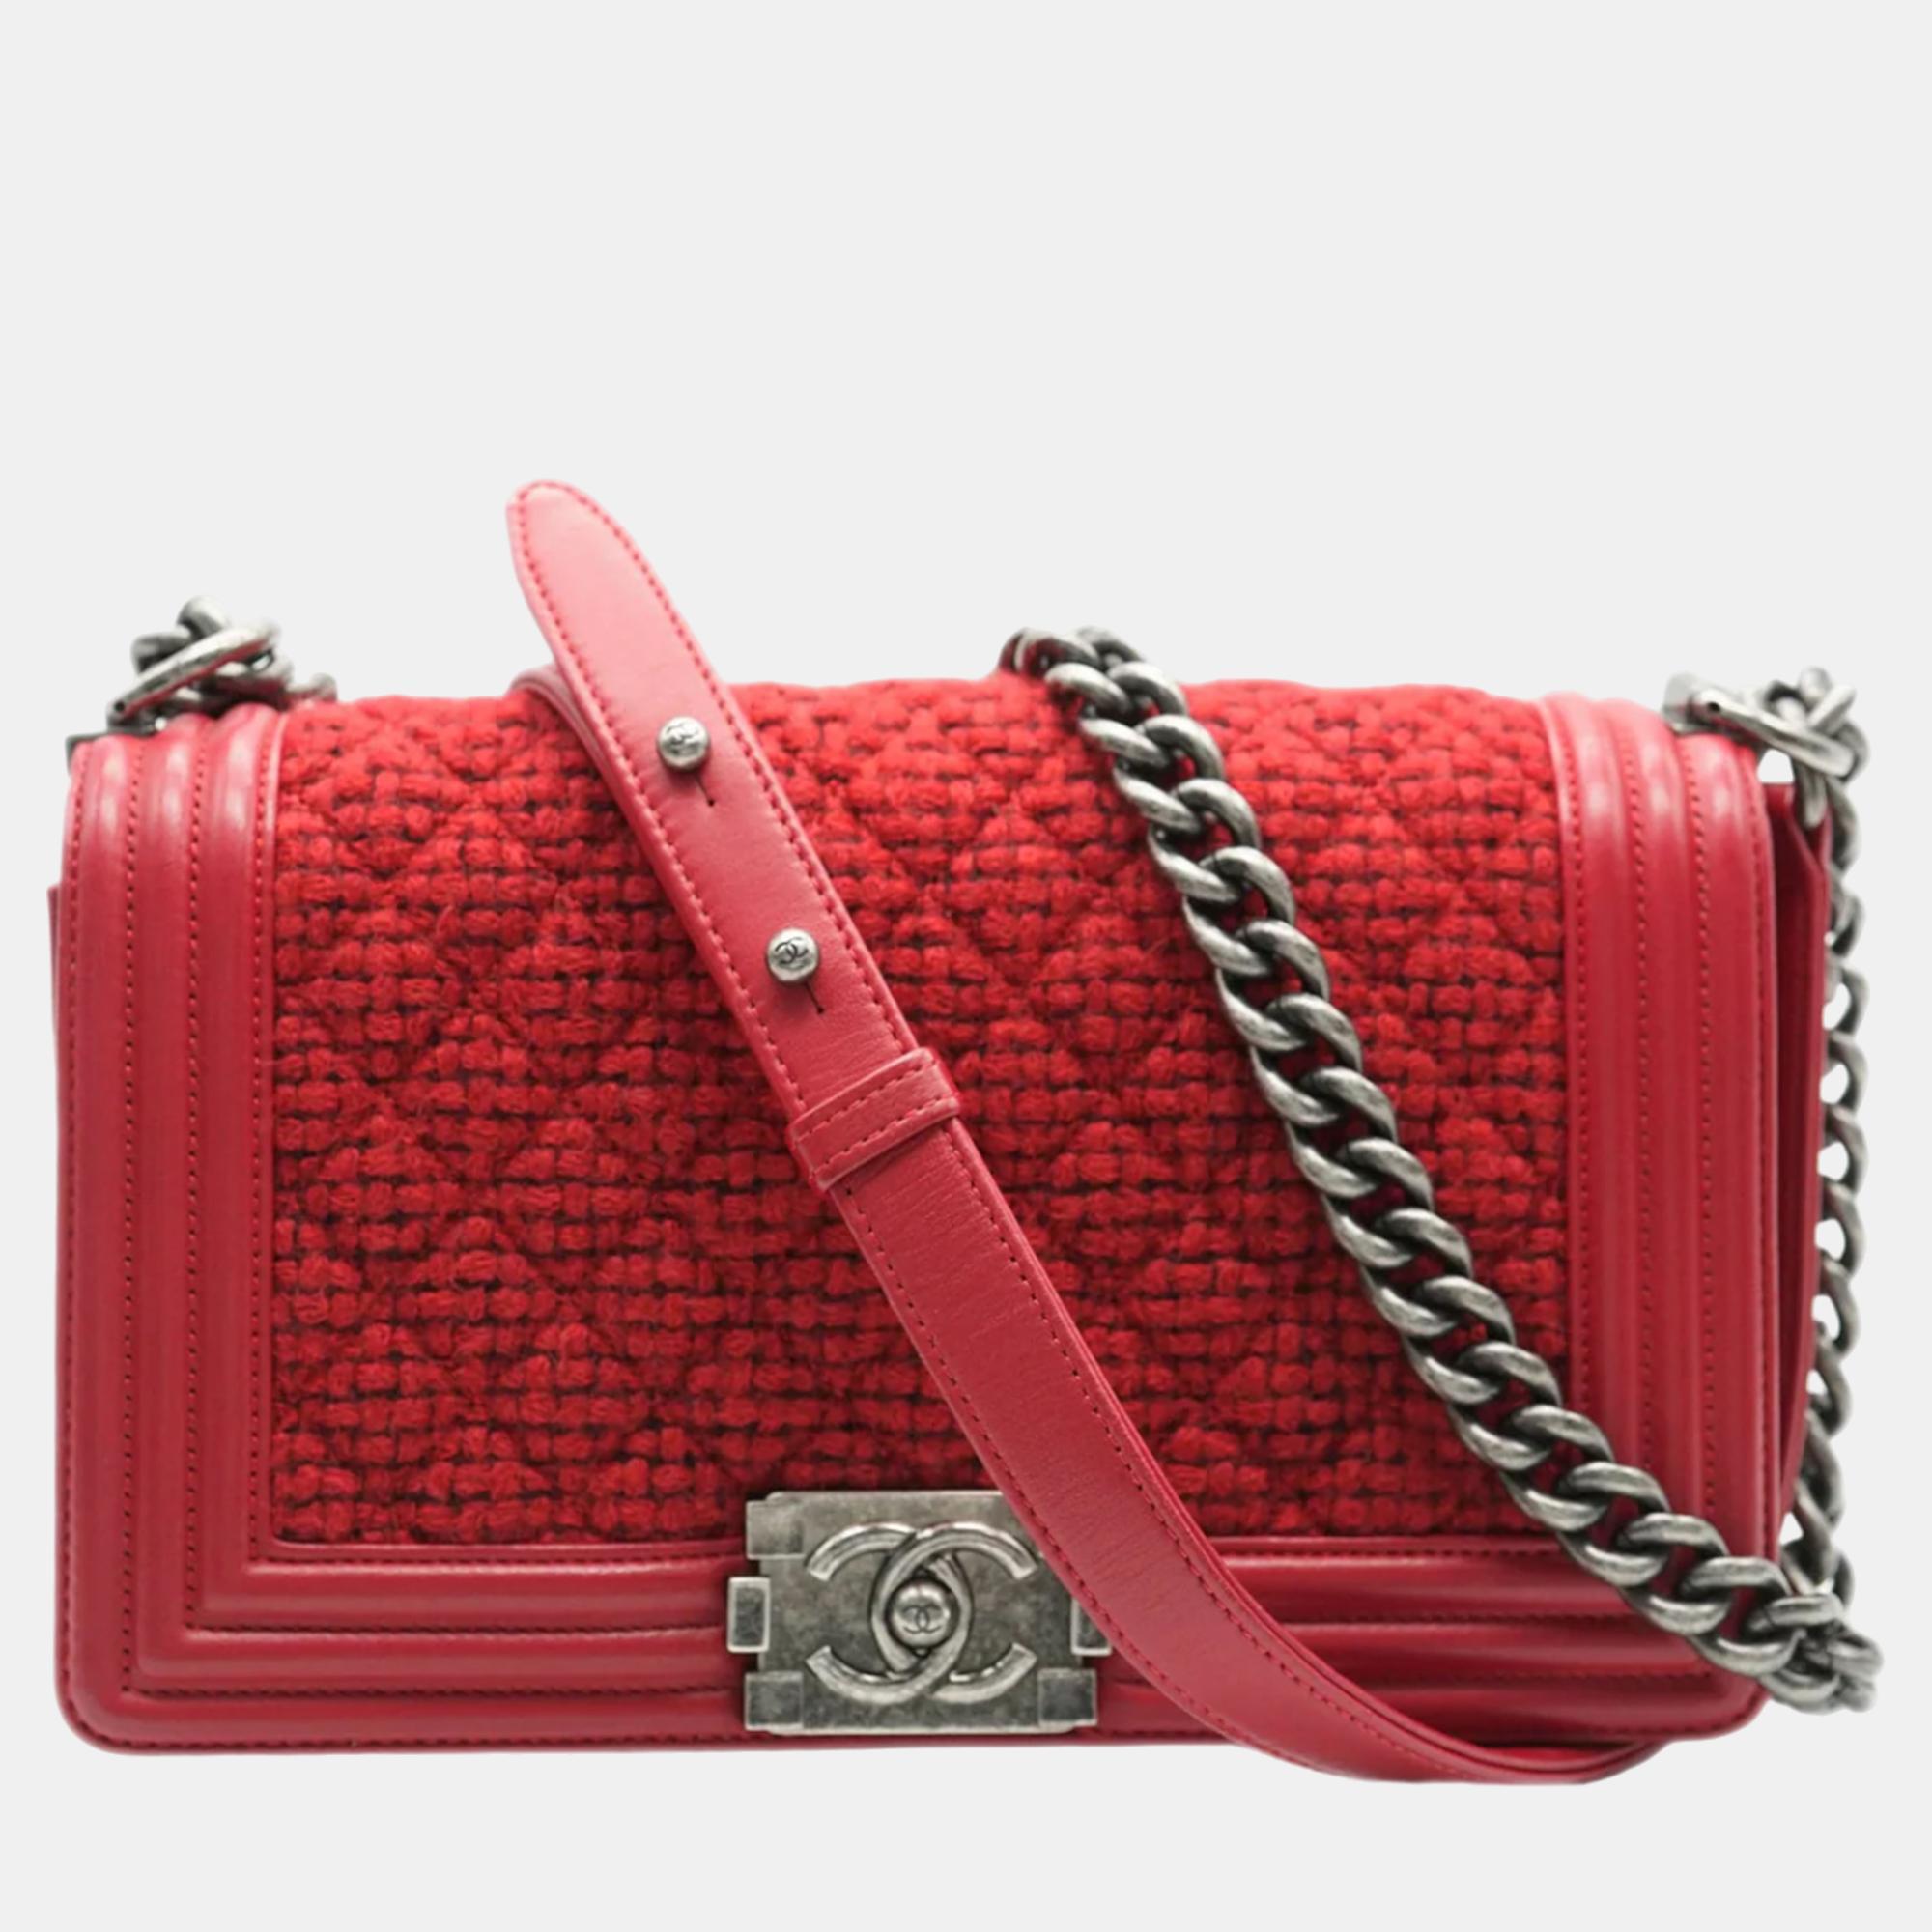 Chanel red quilted tweed lambskin old medium boy bag